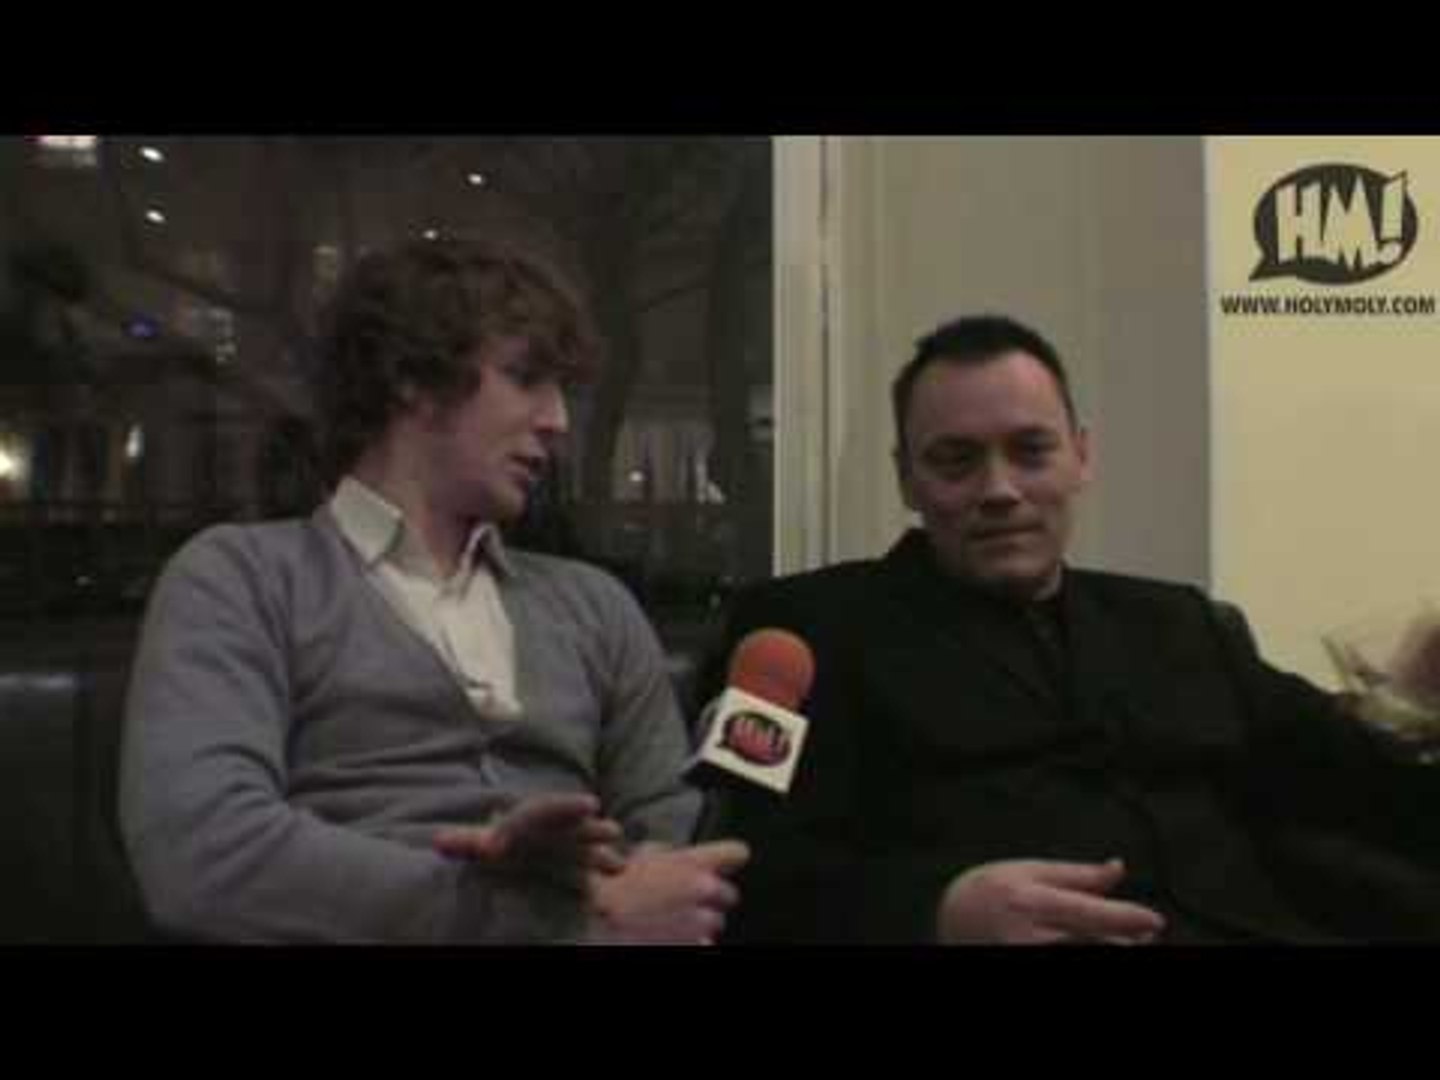 TERRY CHRISTIAN MEETS HOLY MOLY!